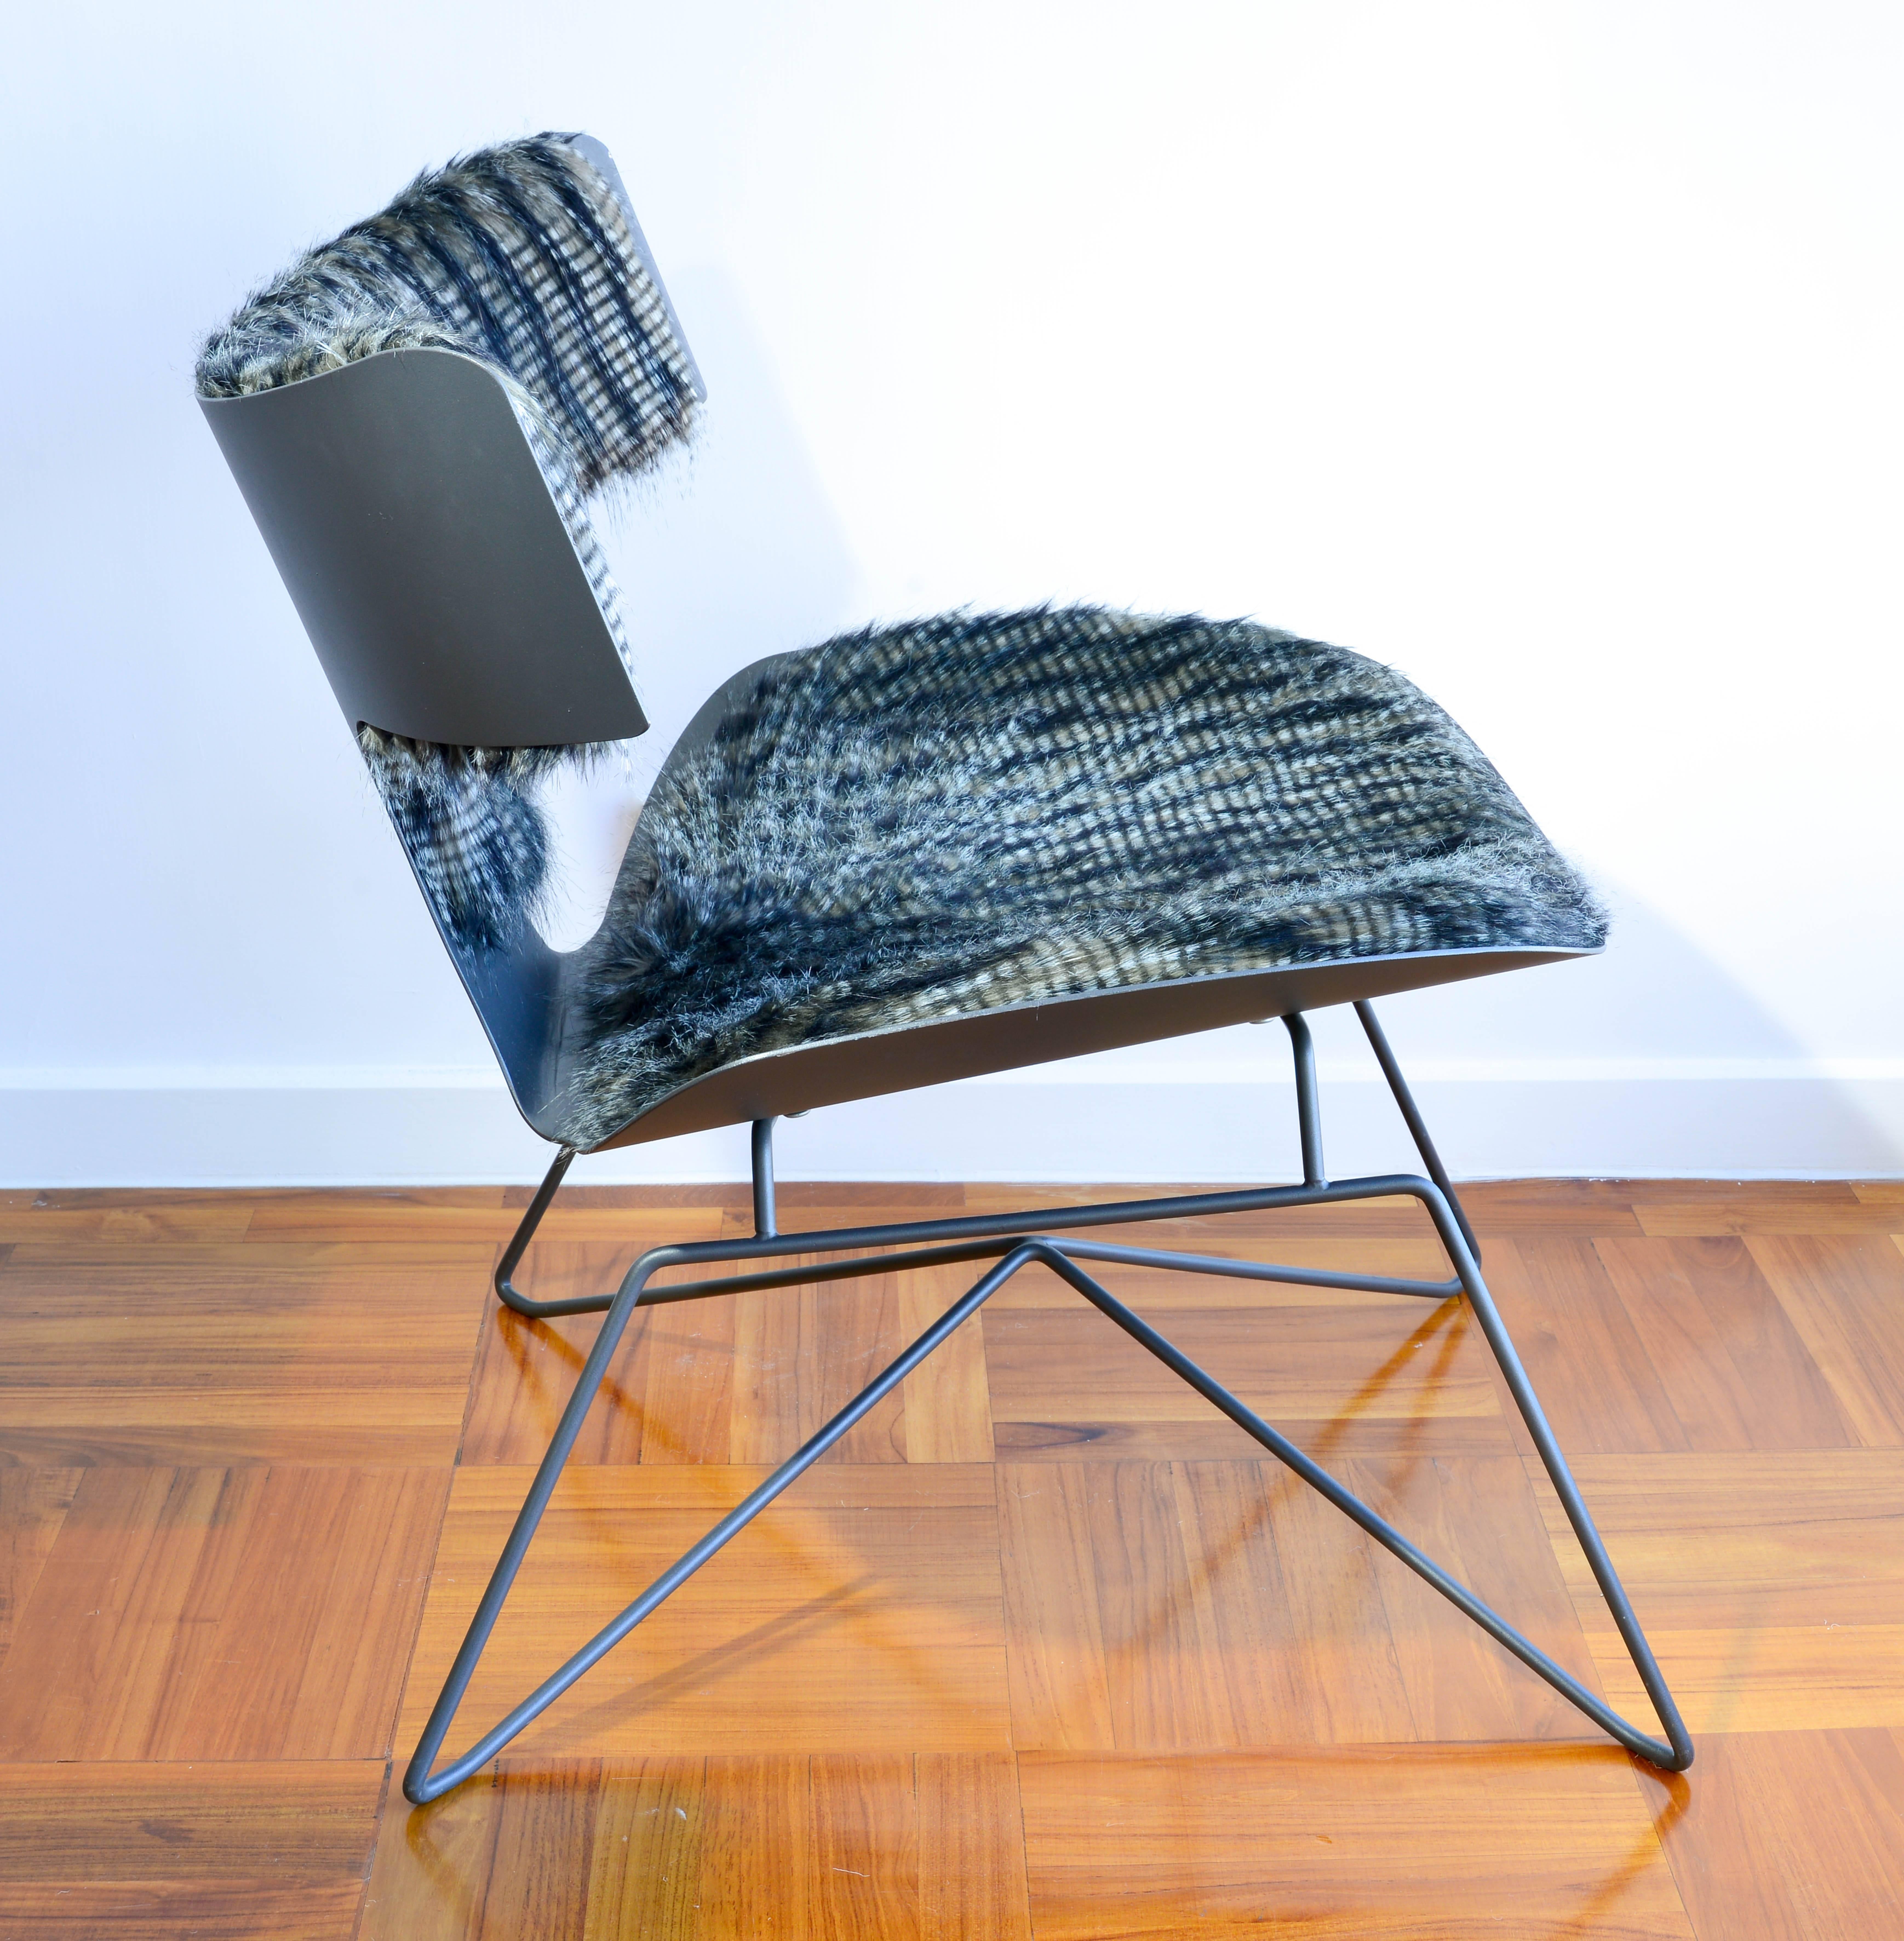 French Powder Coated and Faux Fur Industrial-style Lounge Chair from France